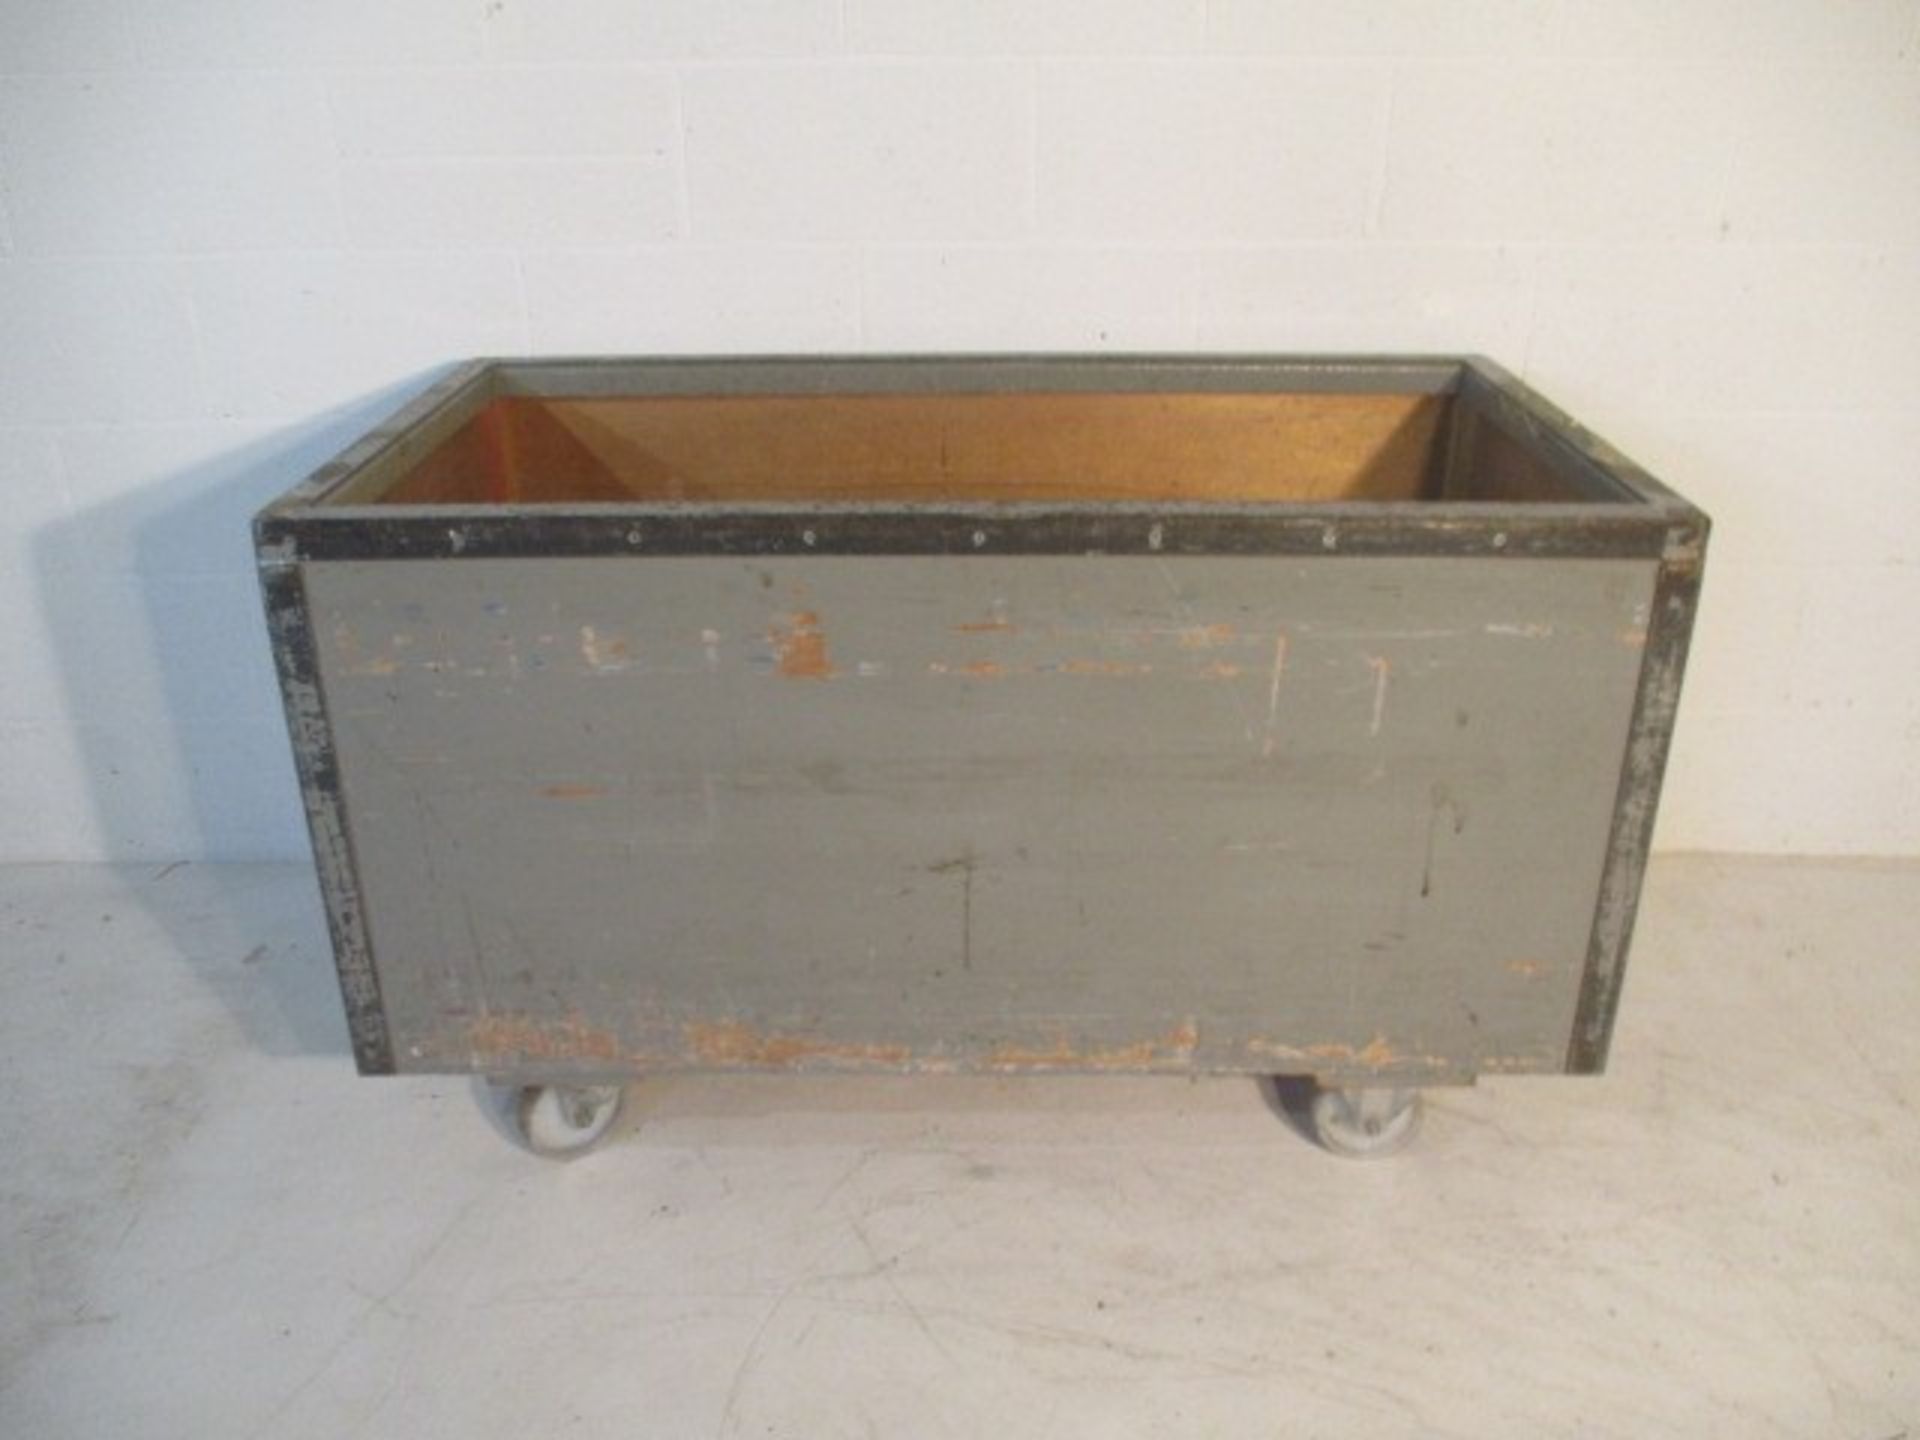 A grey painted trolley with metal edging, 133 cm x 71 cm